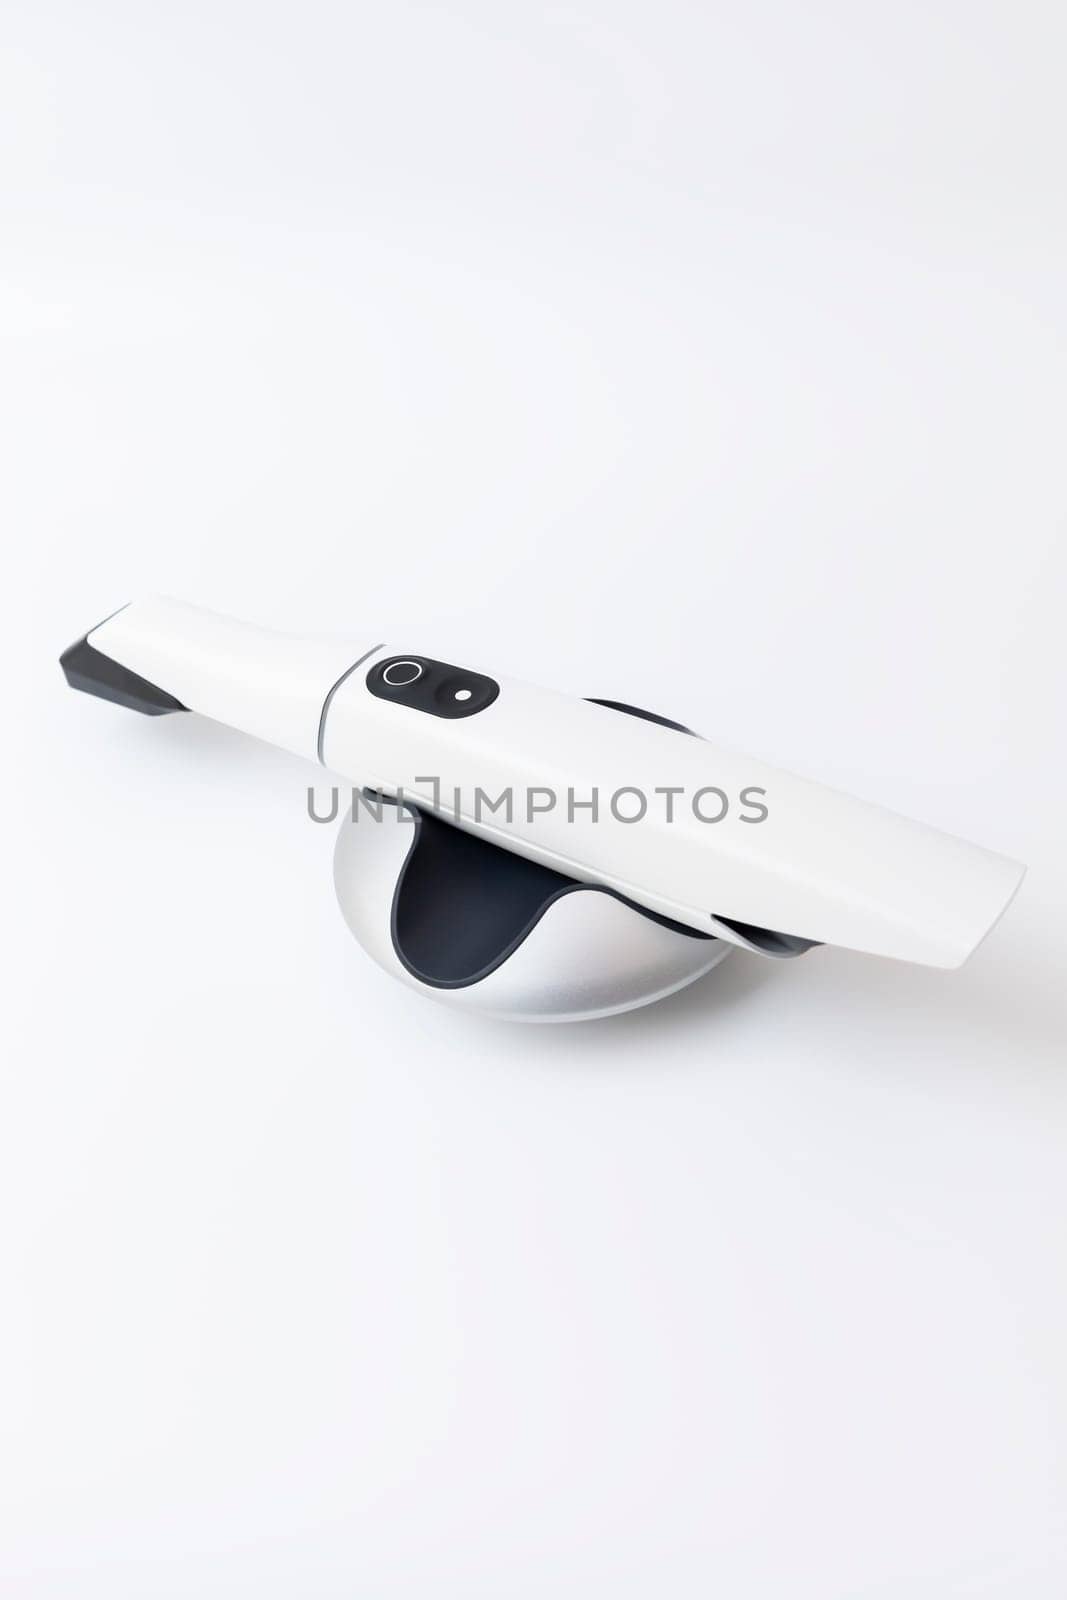 Isolated 3d Dental Tooth Scanner On White Background. Dental Intraoral Equipment, Device For Scanning Teeth. Dentistry And Health Care Concept. Vertical Flat Lay View . High quality photo